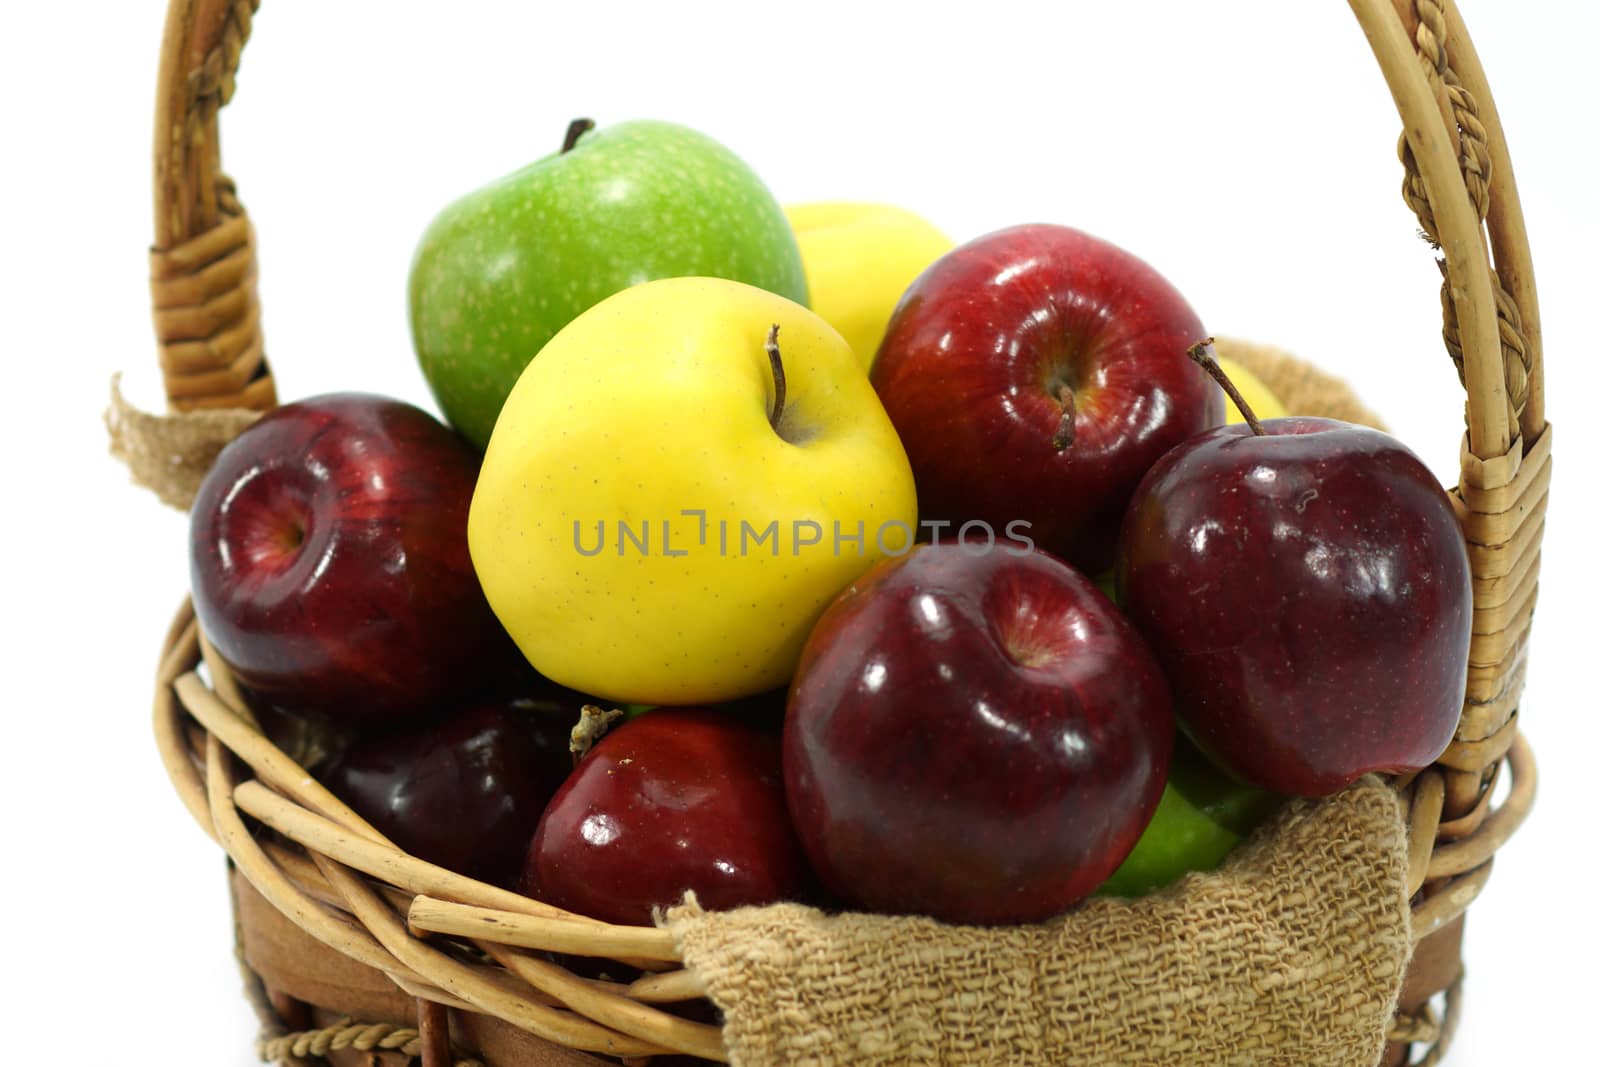 Apples in basket on a white background.